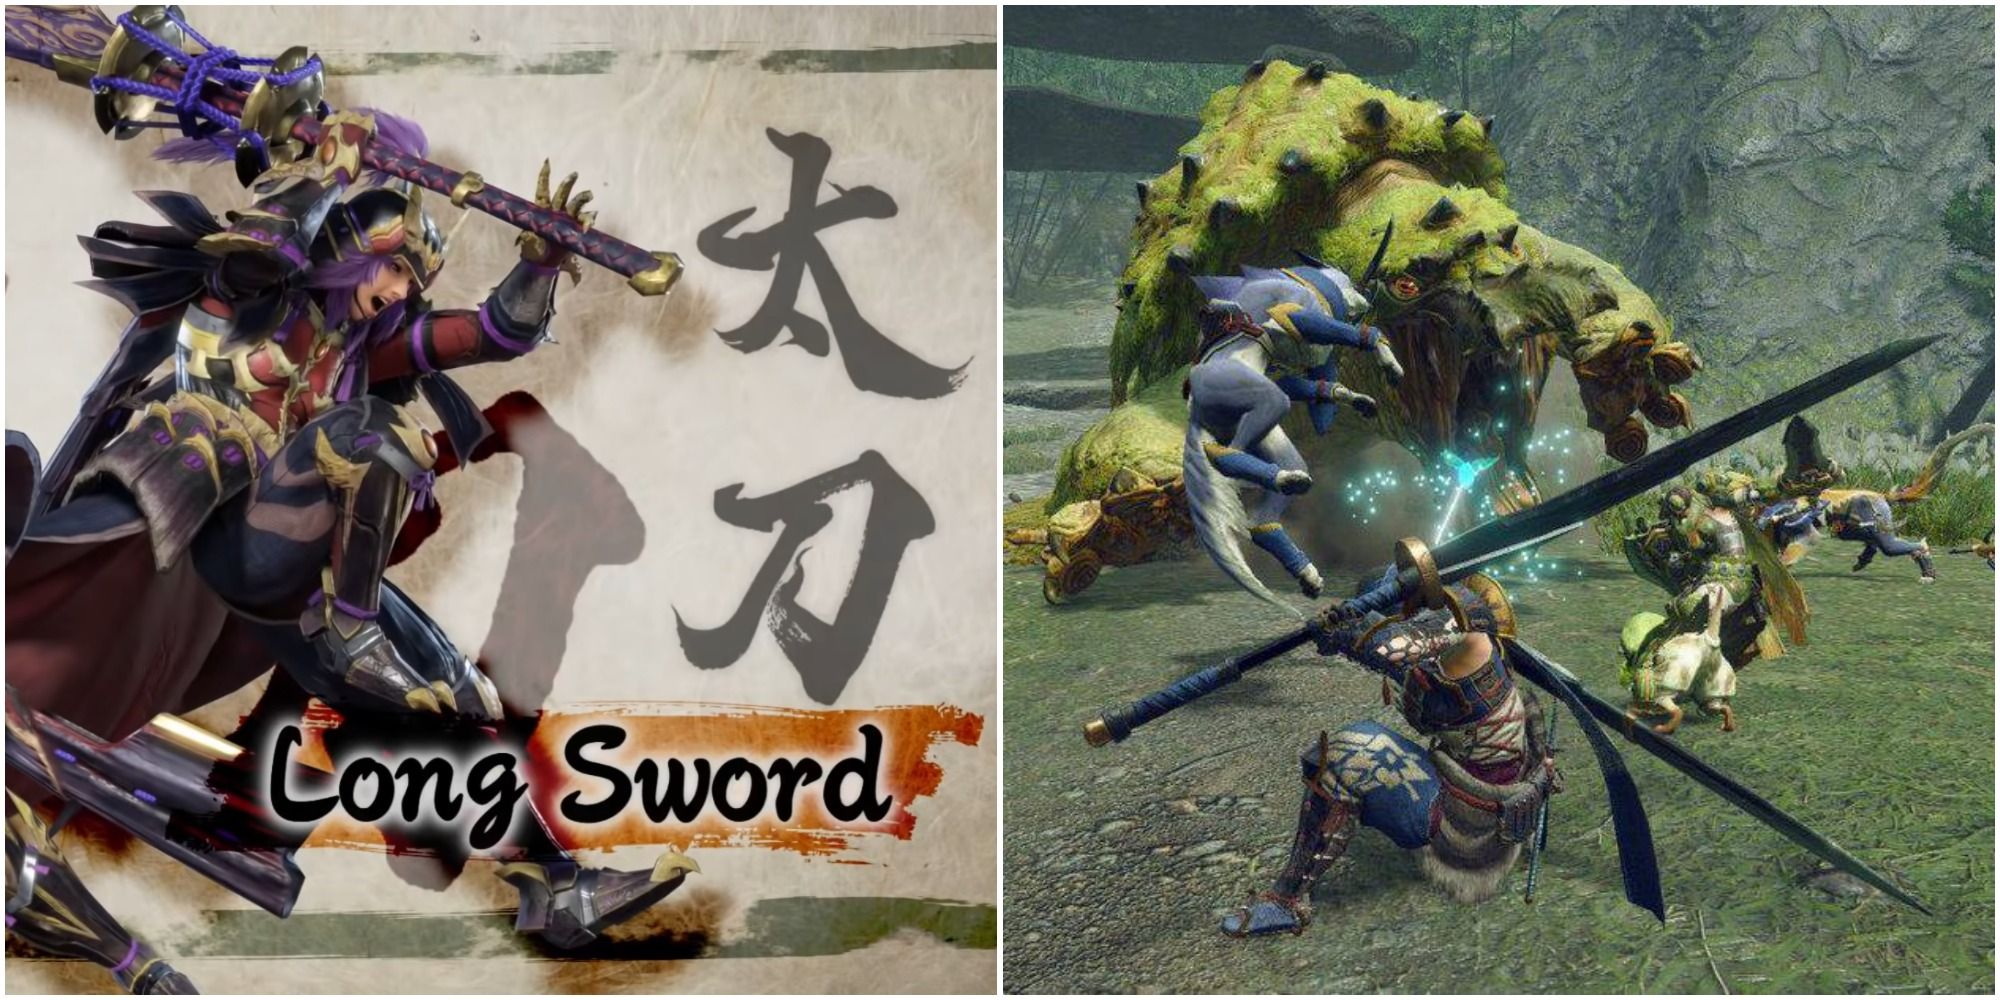 An official artwork of longswords using Magnamalo gear, and a promo shot of a player fighting a Tetranadon with a longsword